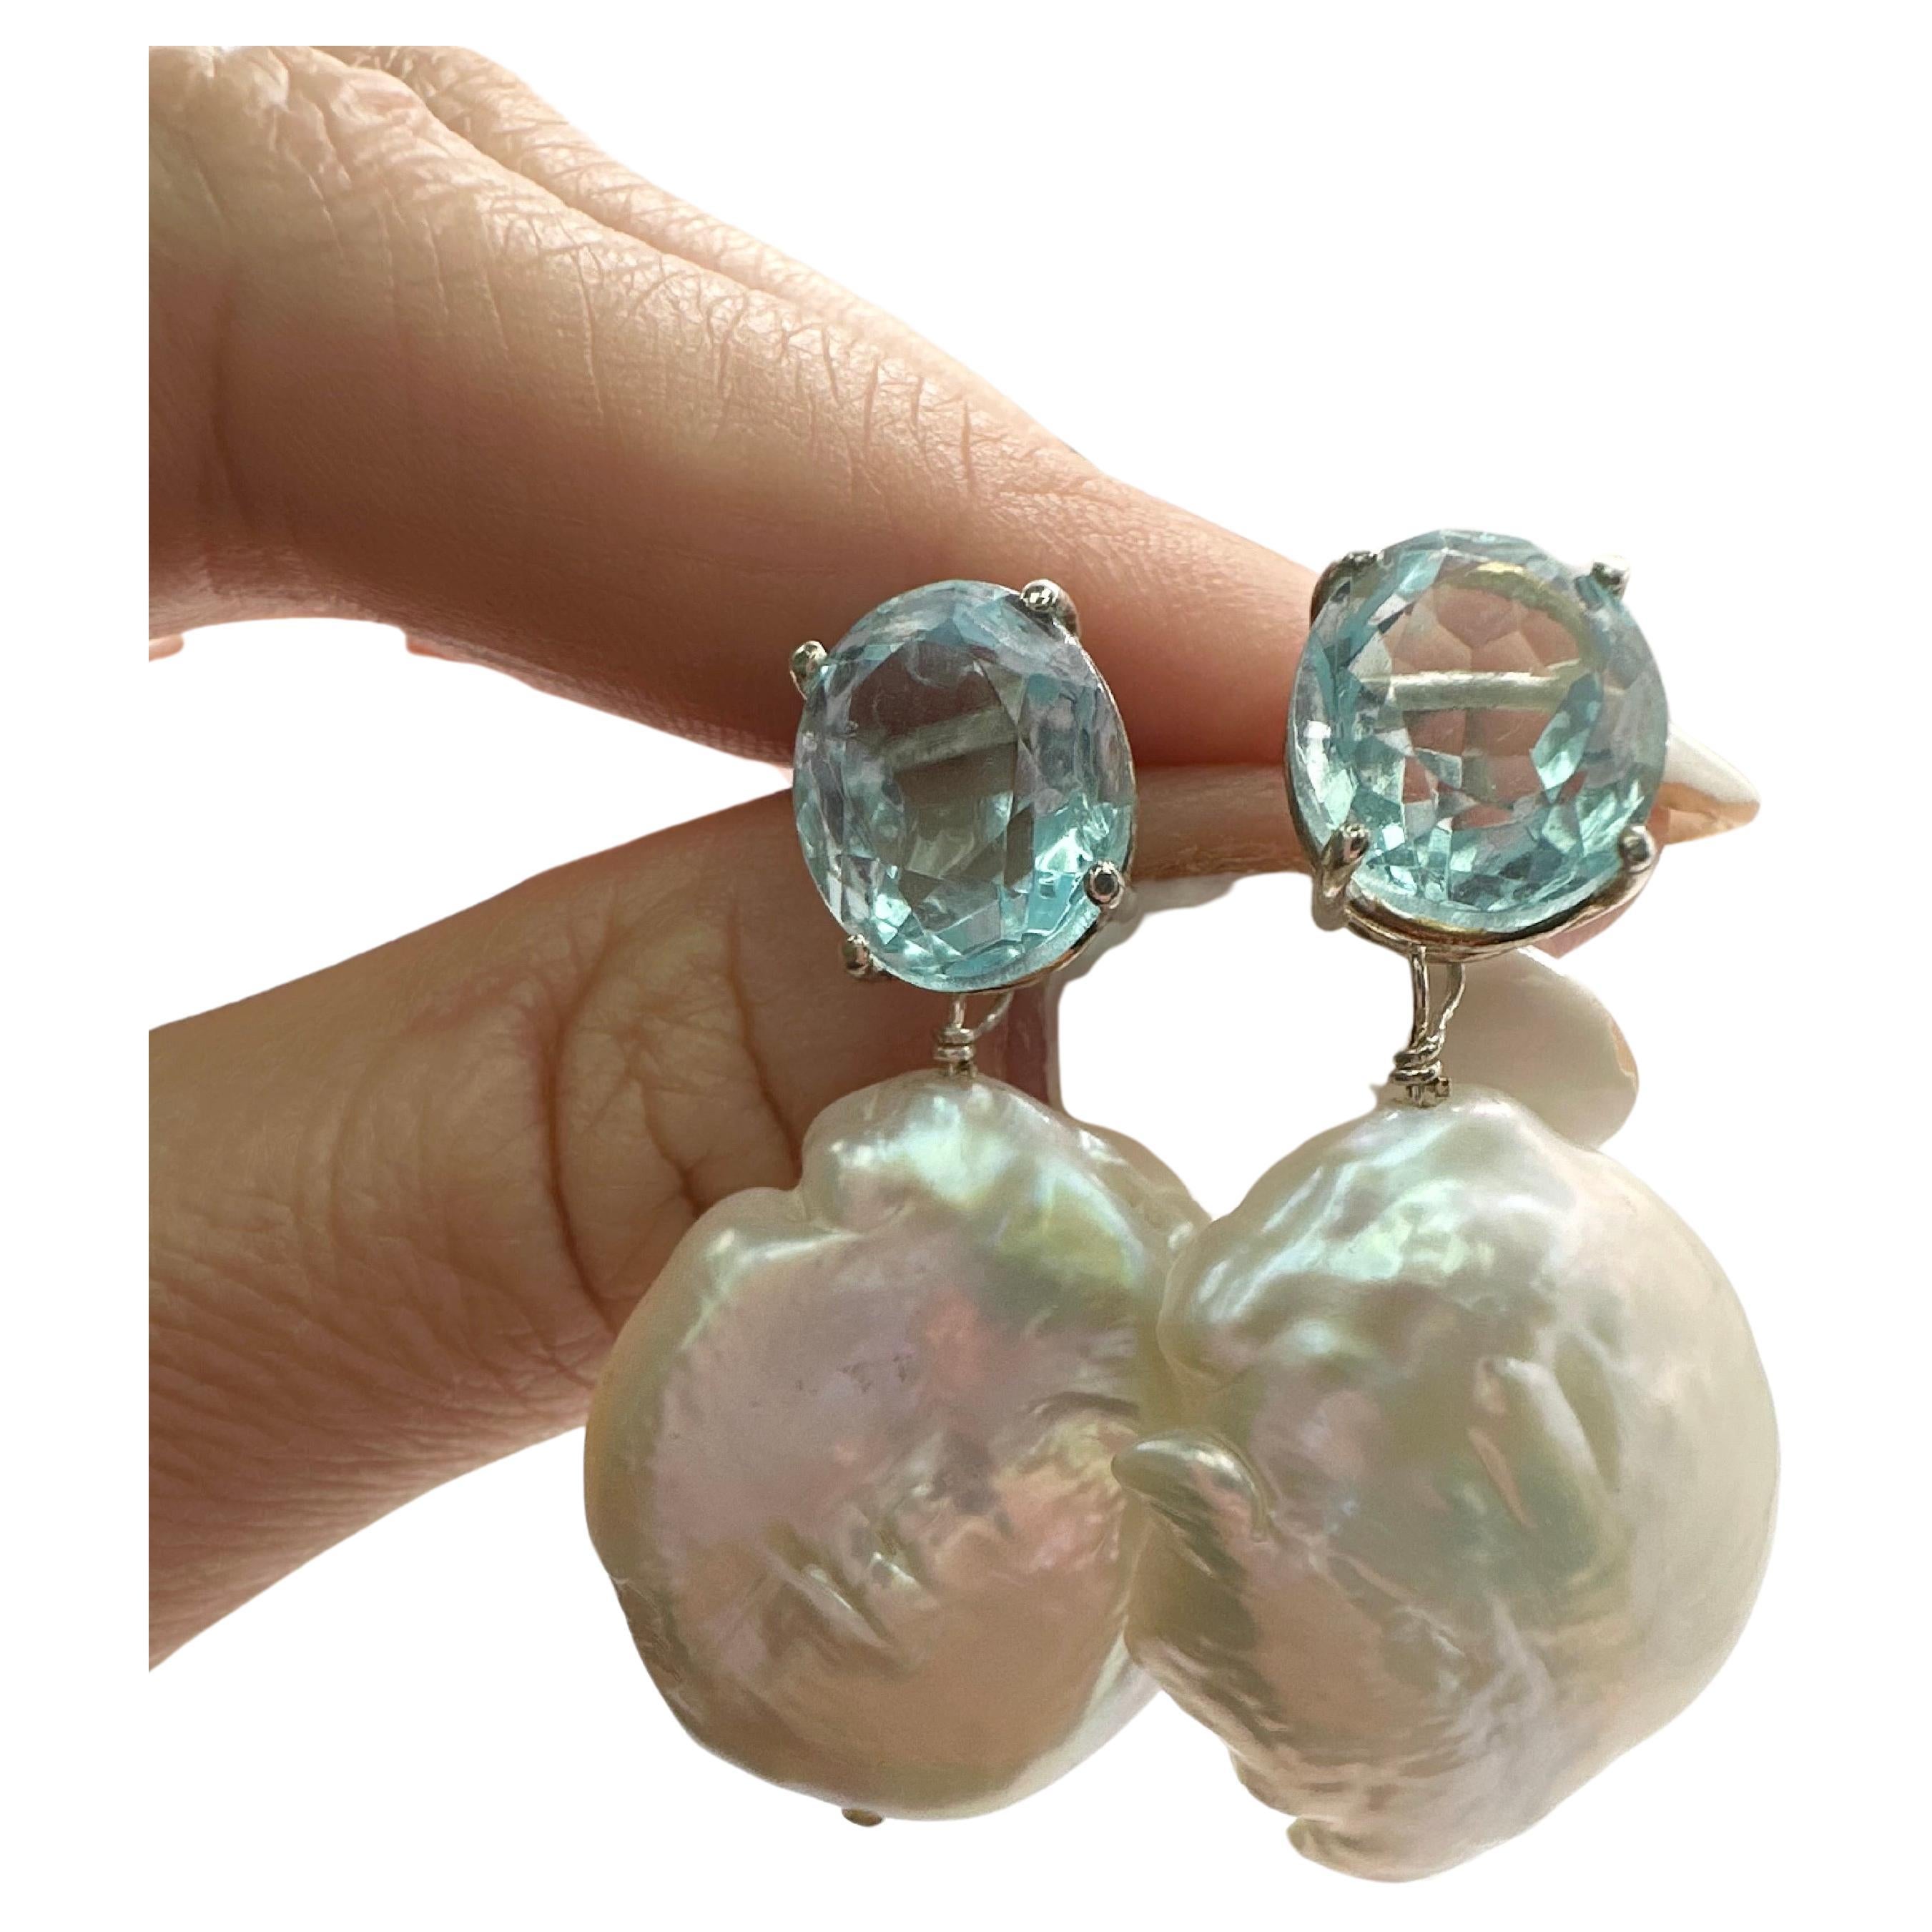 Unique boroque pearl earrings with blue topaz in silver stamped 925, earrings are dangling style!

Certificate of authenticity comes with purchase!

ABOUT US
We are a family-owned business. Our studio in located in the heart of Boca Raton at the